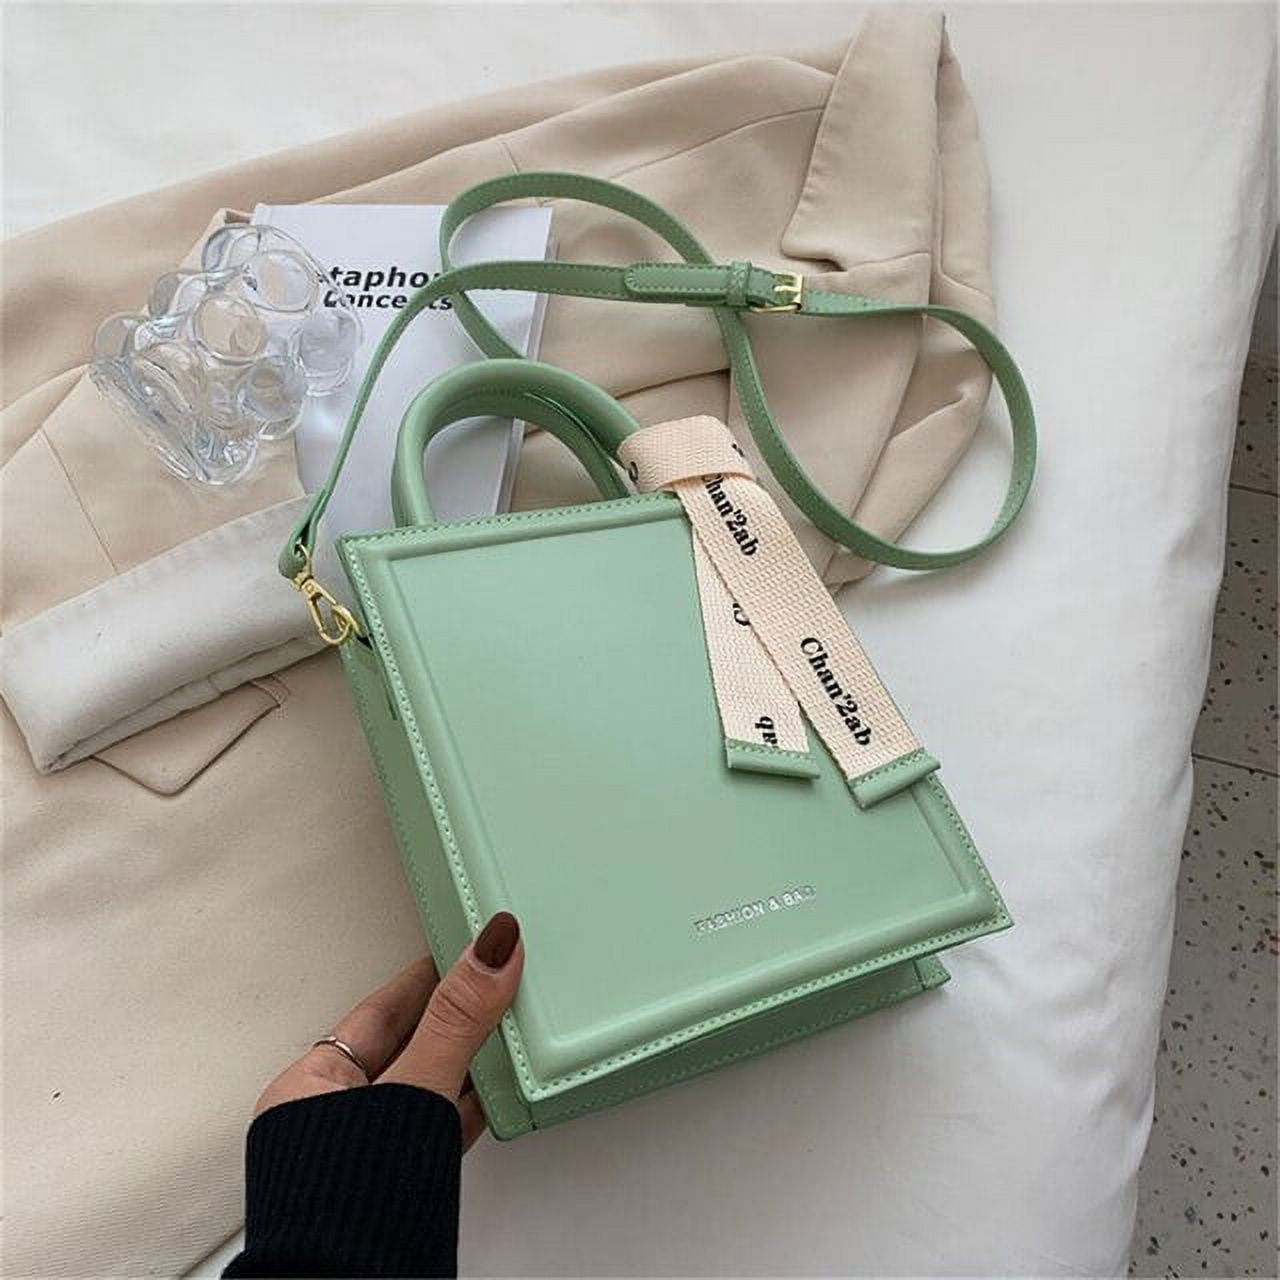 CoCopeaunt Spring And Summer New Fashion Female Small Totes Bag Candy Color  PU Leather Shoulder Bags for Women Crossbody Bag Handbag 